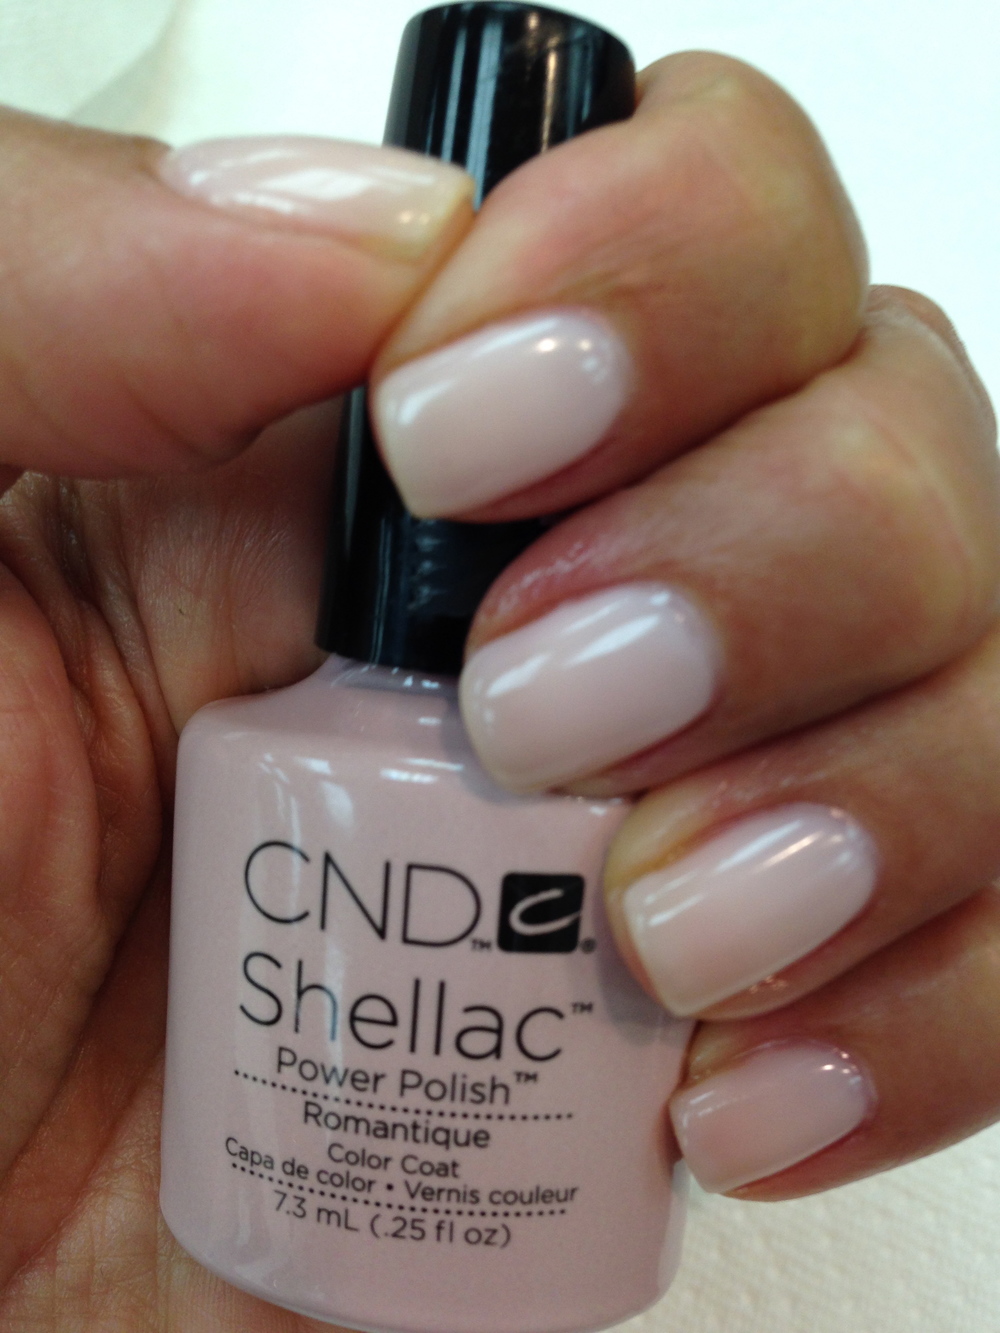 Mani Monday: The Perfect Natural Manicure — The Glow Girl by Melissa Meyers